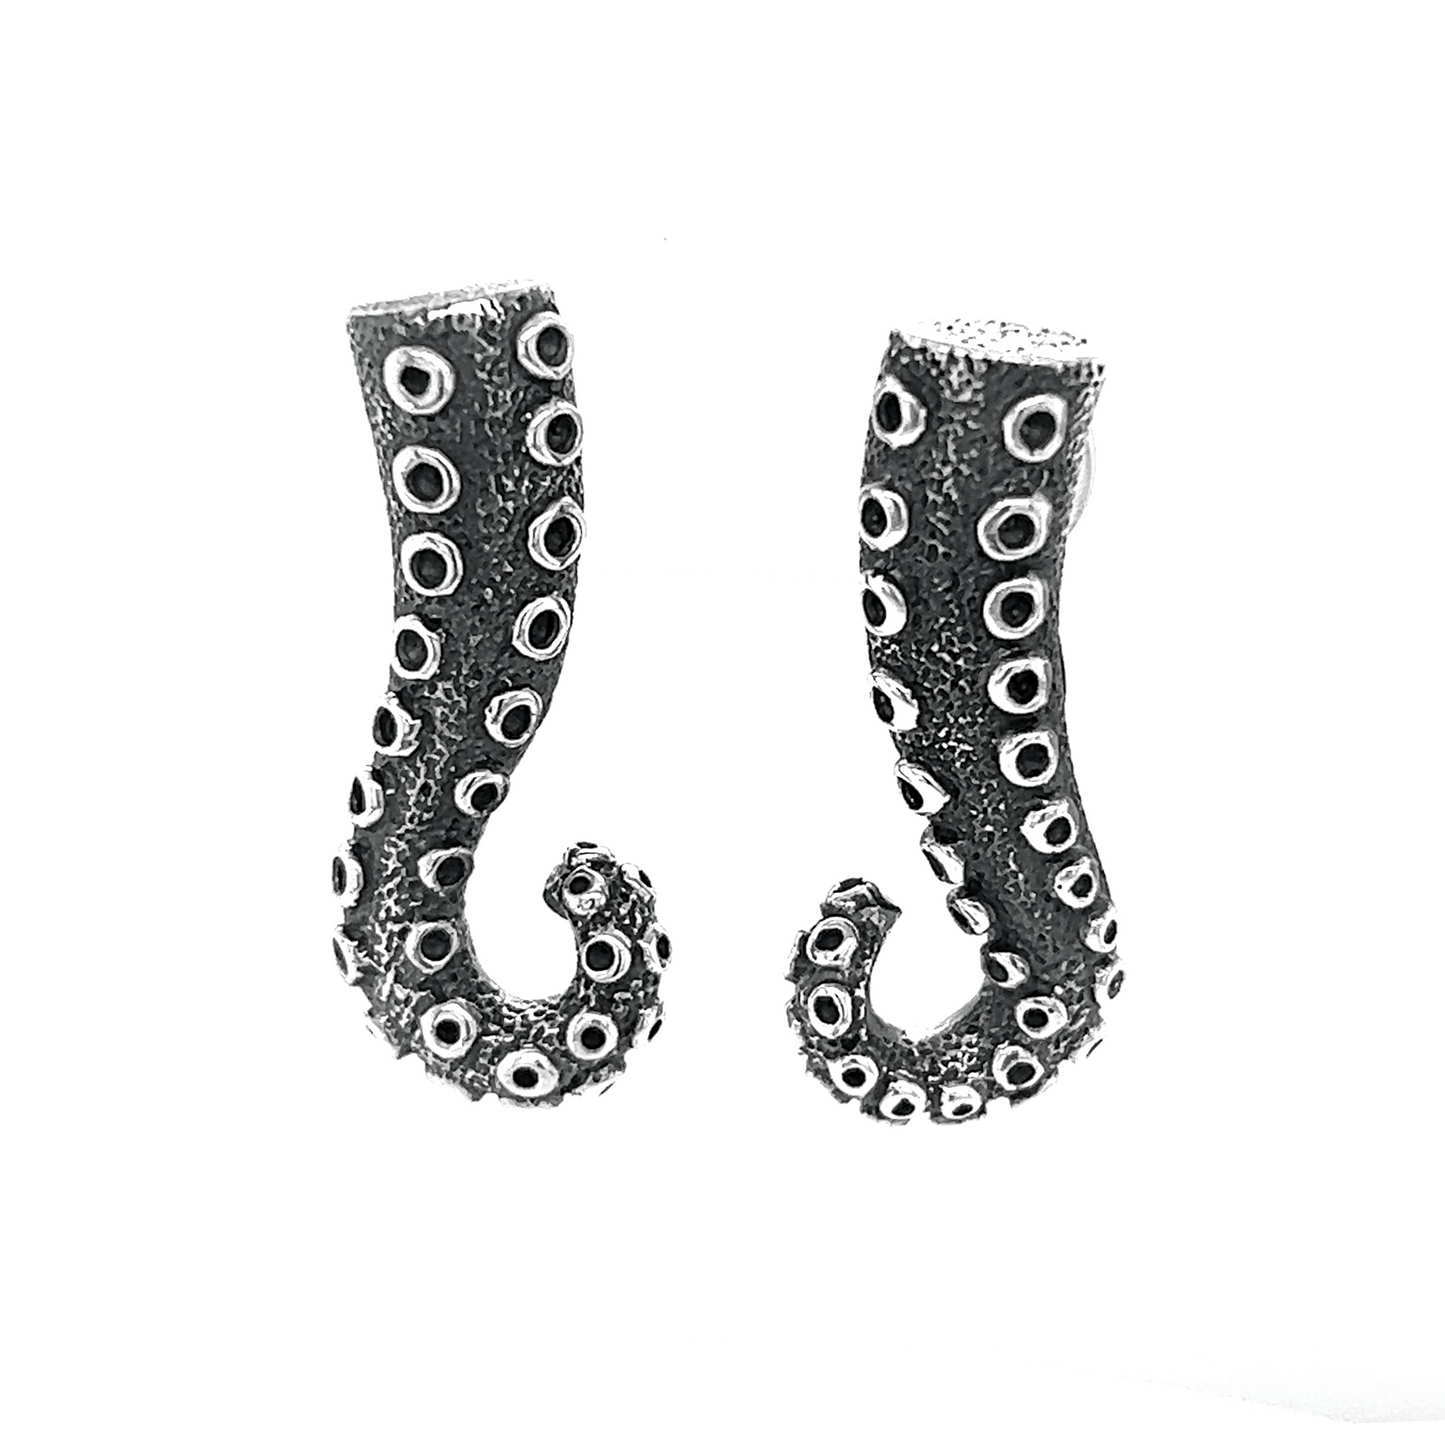 A pair of Super Silver Edgy Octopus Tentacle Post Earrings with intricately detailed tentacles on a white background.